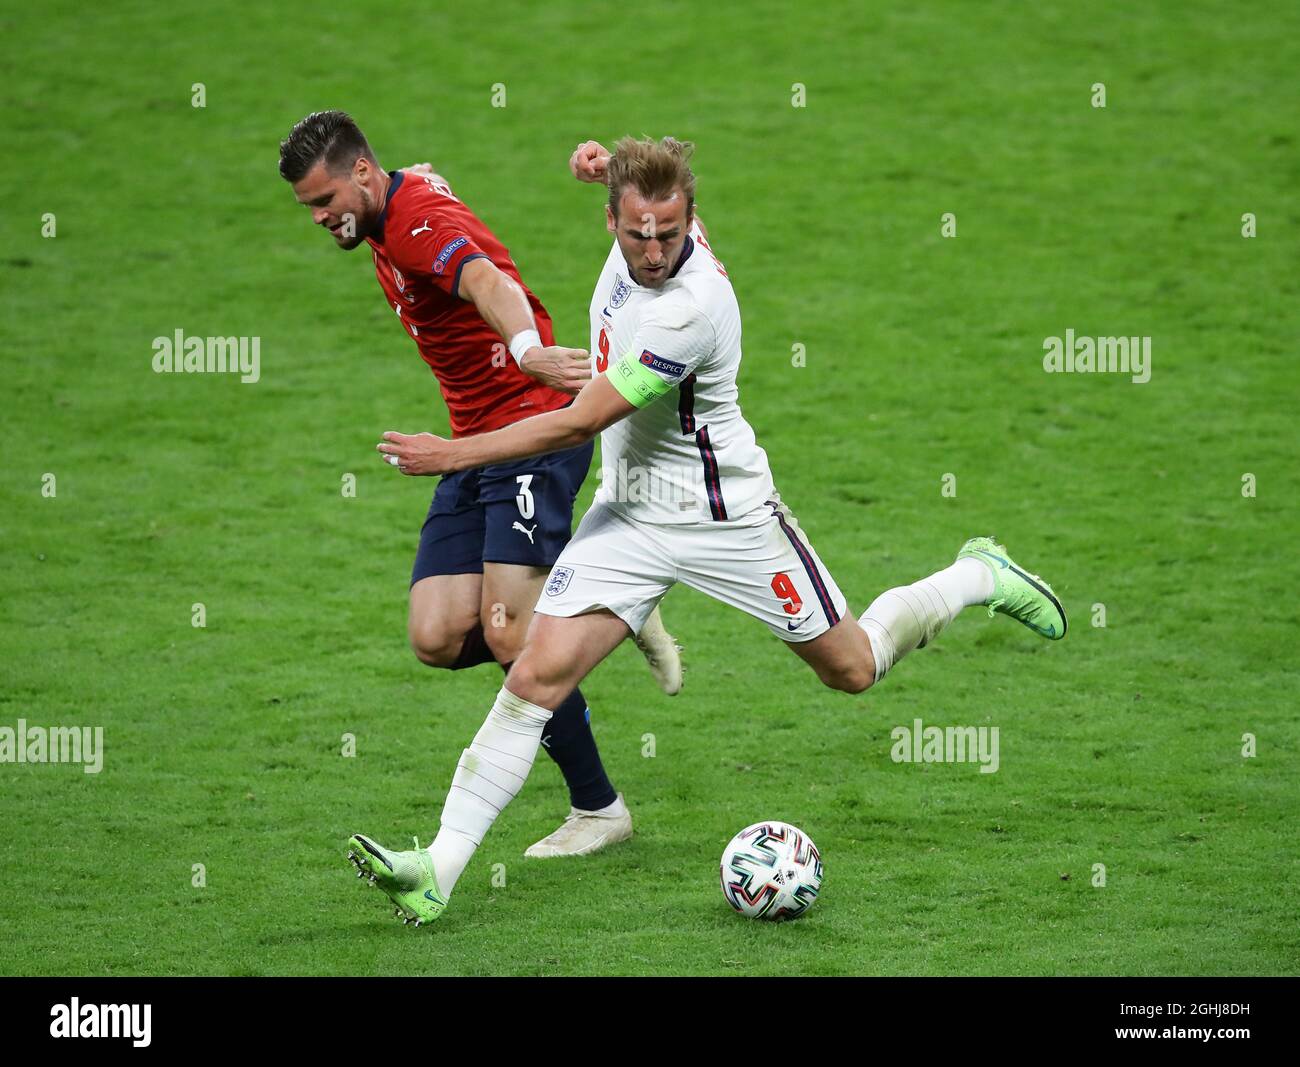 London, England, 22nd June 2021. Harry Kane of England tackled by Ondfej Celustka of Czech Republic during the UEFA European Championships match at Wembley Stadium, London. Picture credit should read: David Klein / Sportimage via PA Images Stock Photo